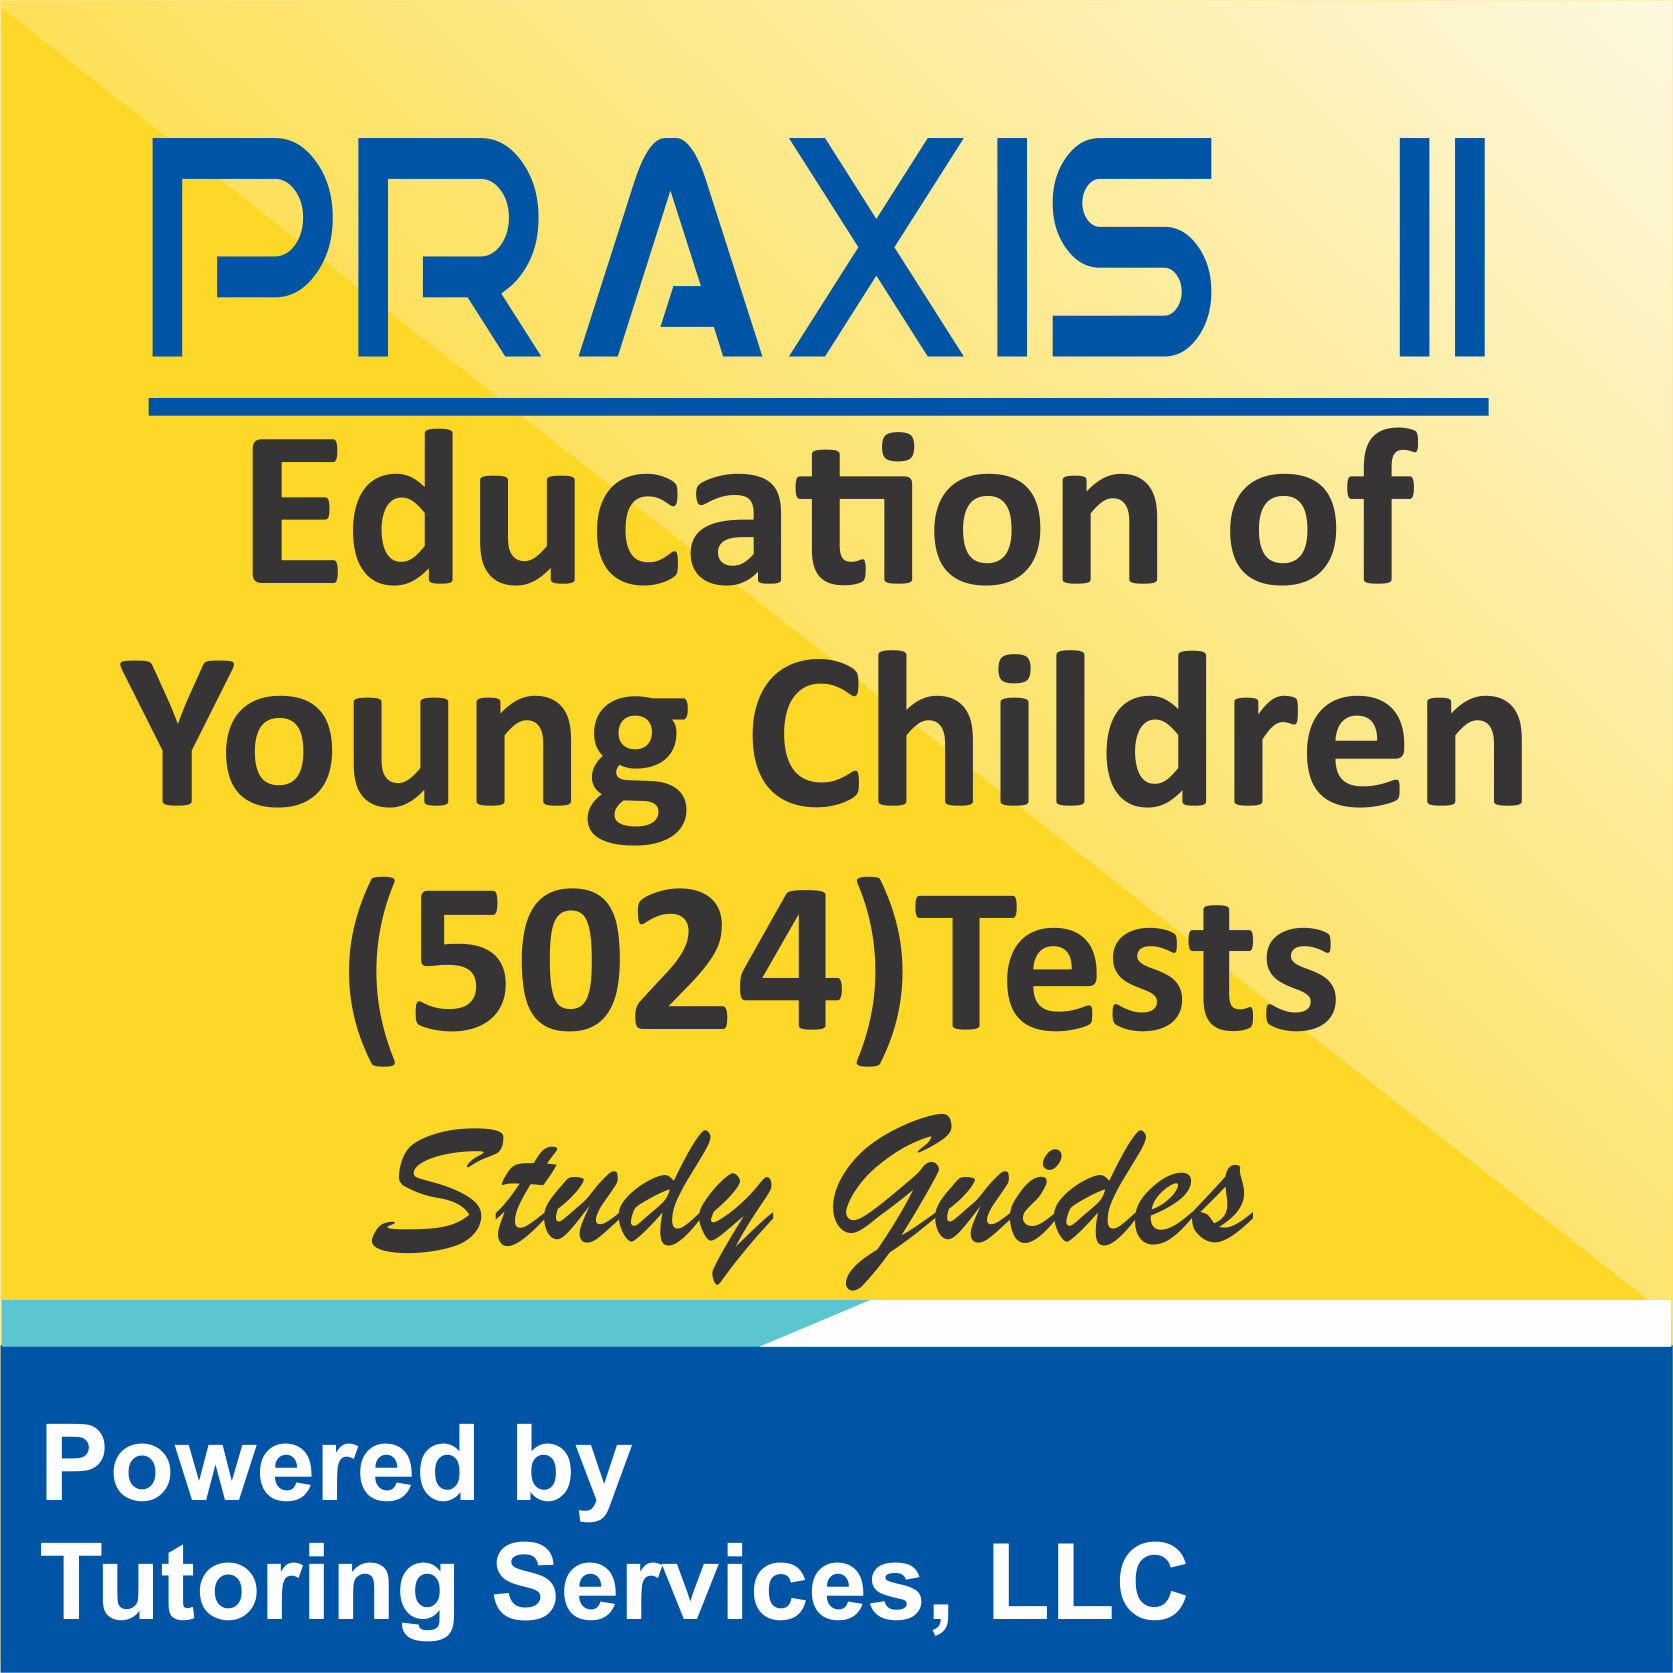 Praxis II Education of Young Children (5024) Examination Information